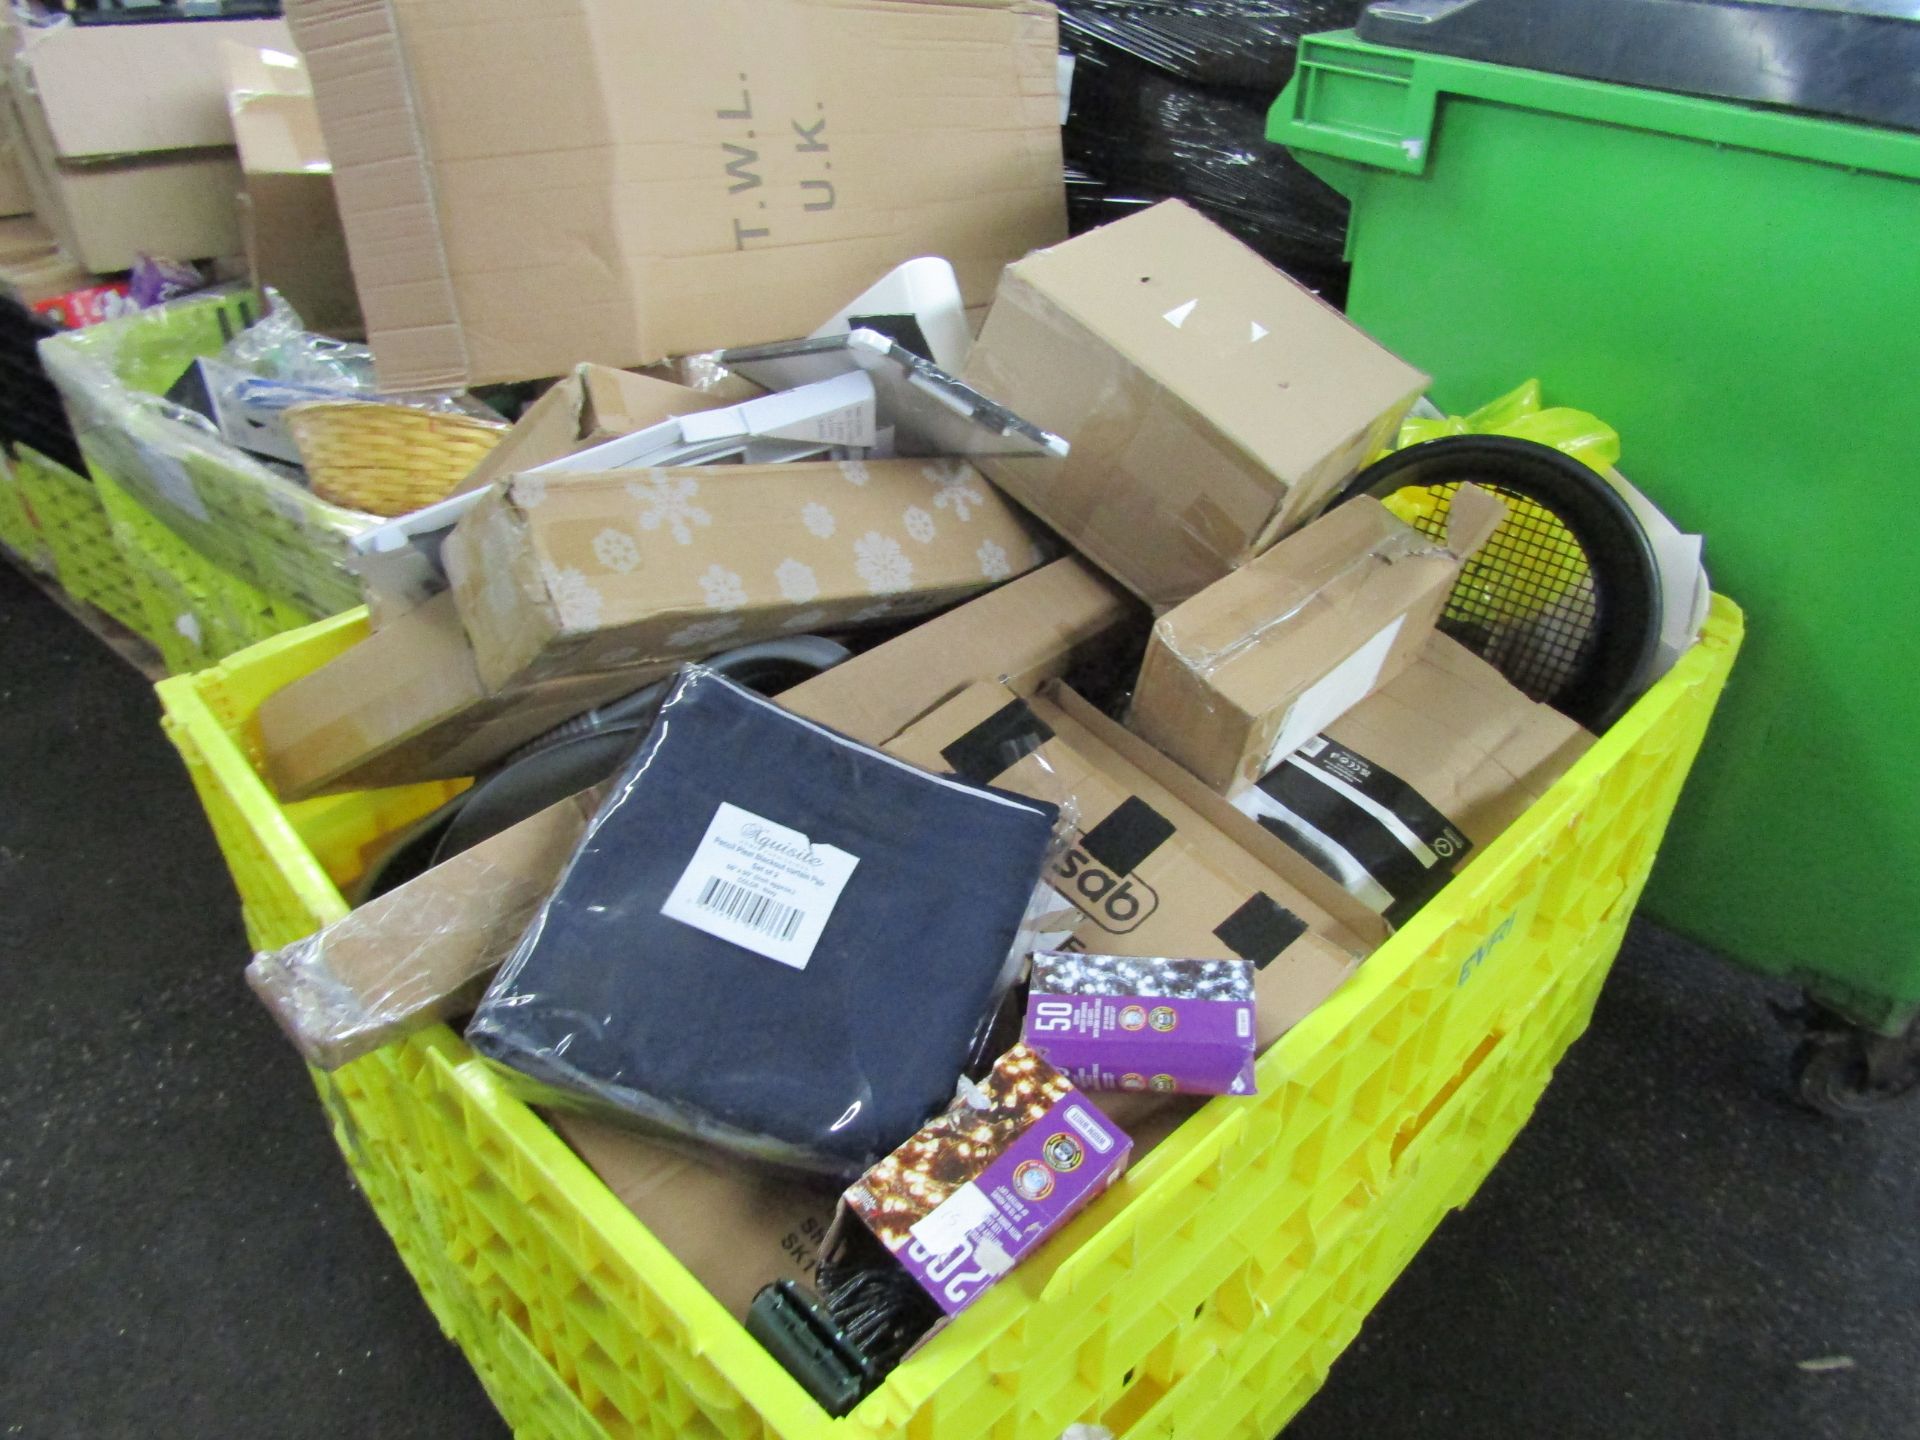 Pallet of unmanifested damaged packaging/faulty/missing parts Gifts, Toys, Household Items